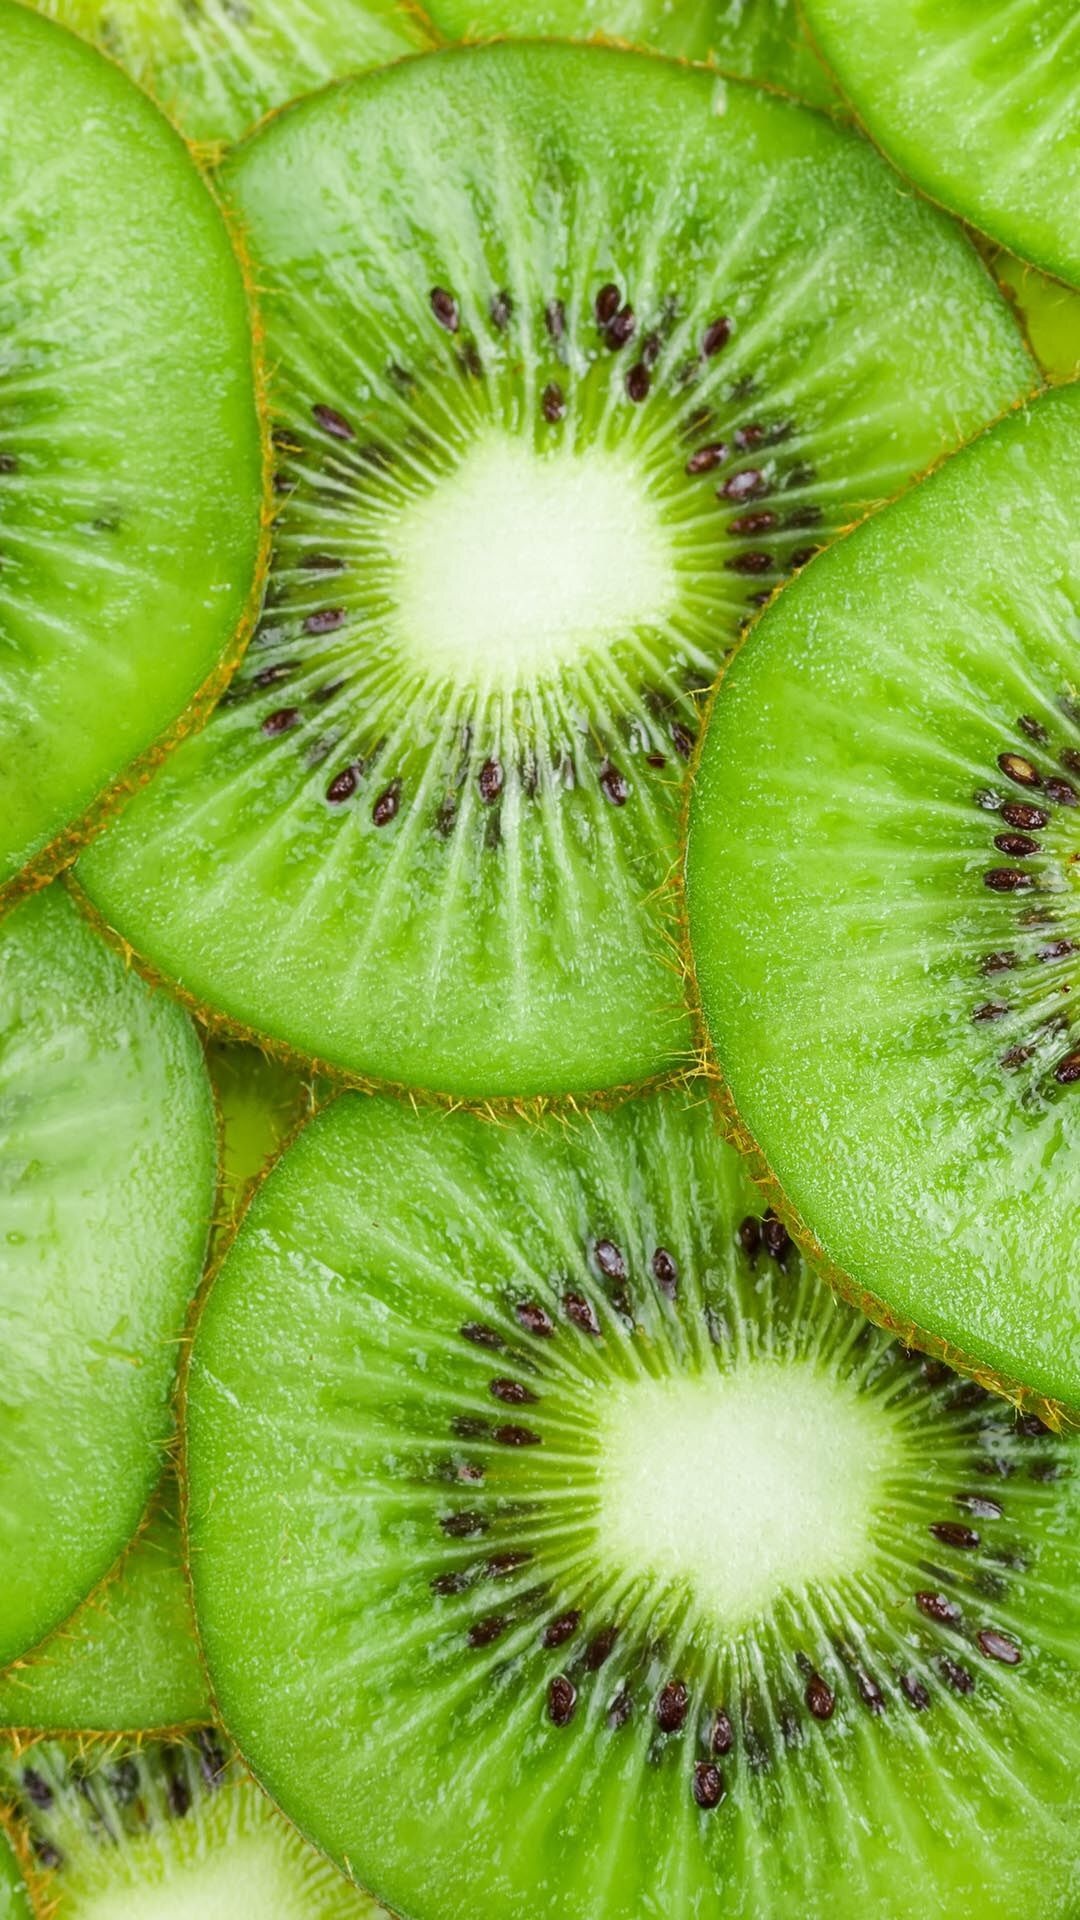 Cute kiwi wallpapers, Adorable designs, Playful fruit, Whimsical backgrounds, 1080x1920 Full HD Phone